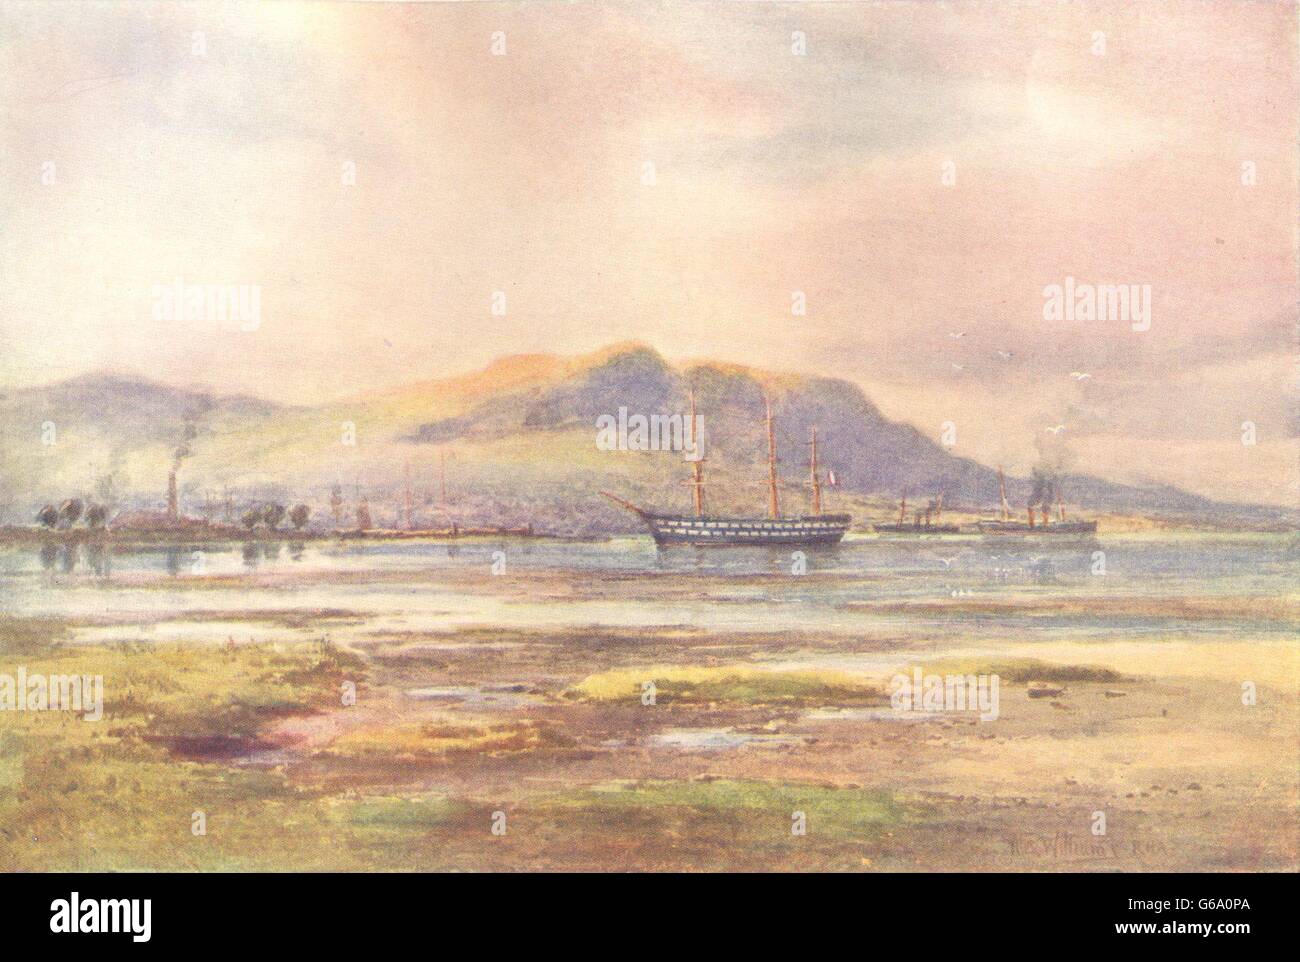 IRELAND: Ulster: Cave Hill, Belfast. Sailing ship. Steamer., old print c1912 Stock Photo